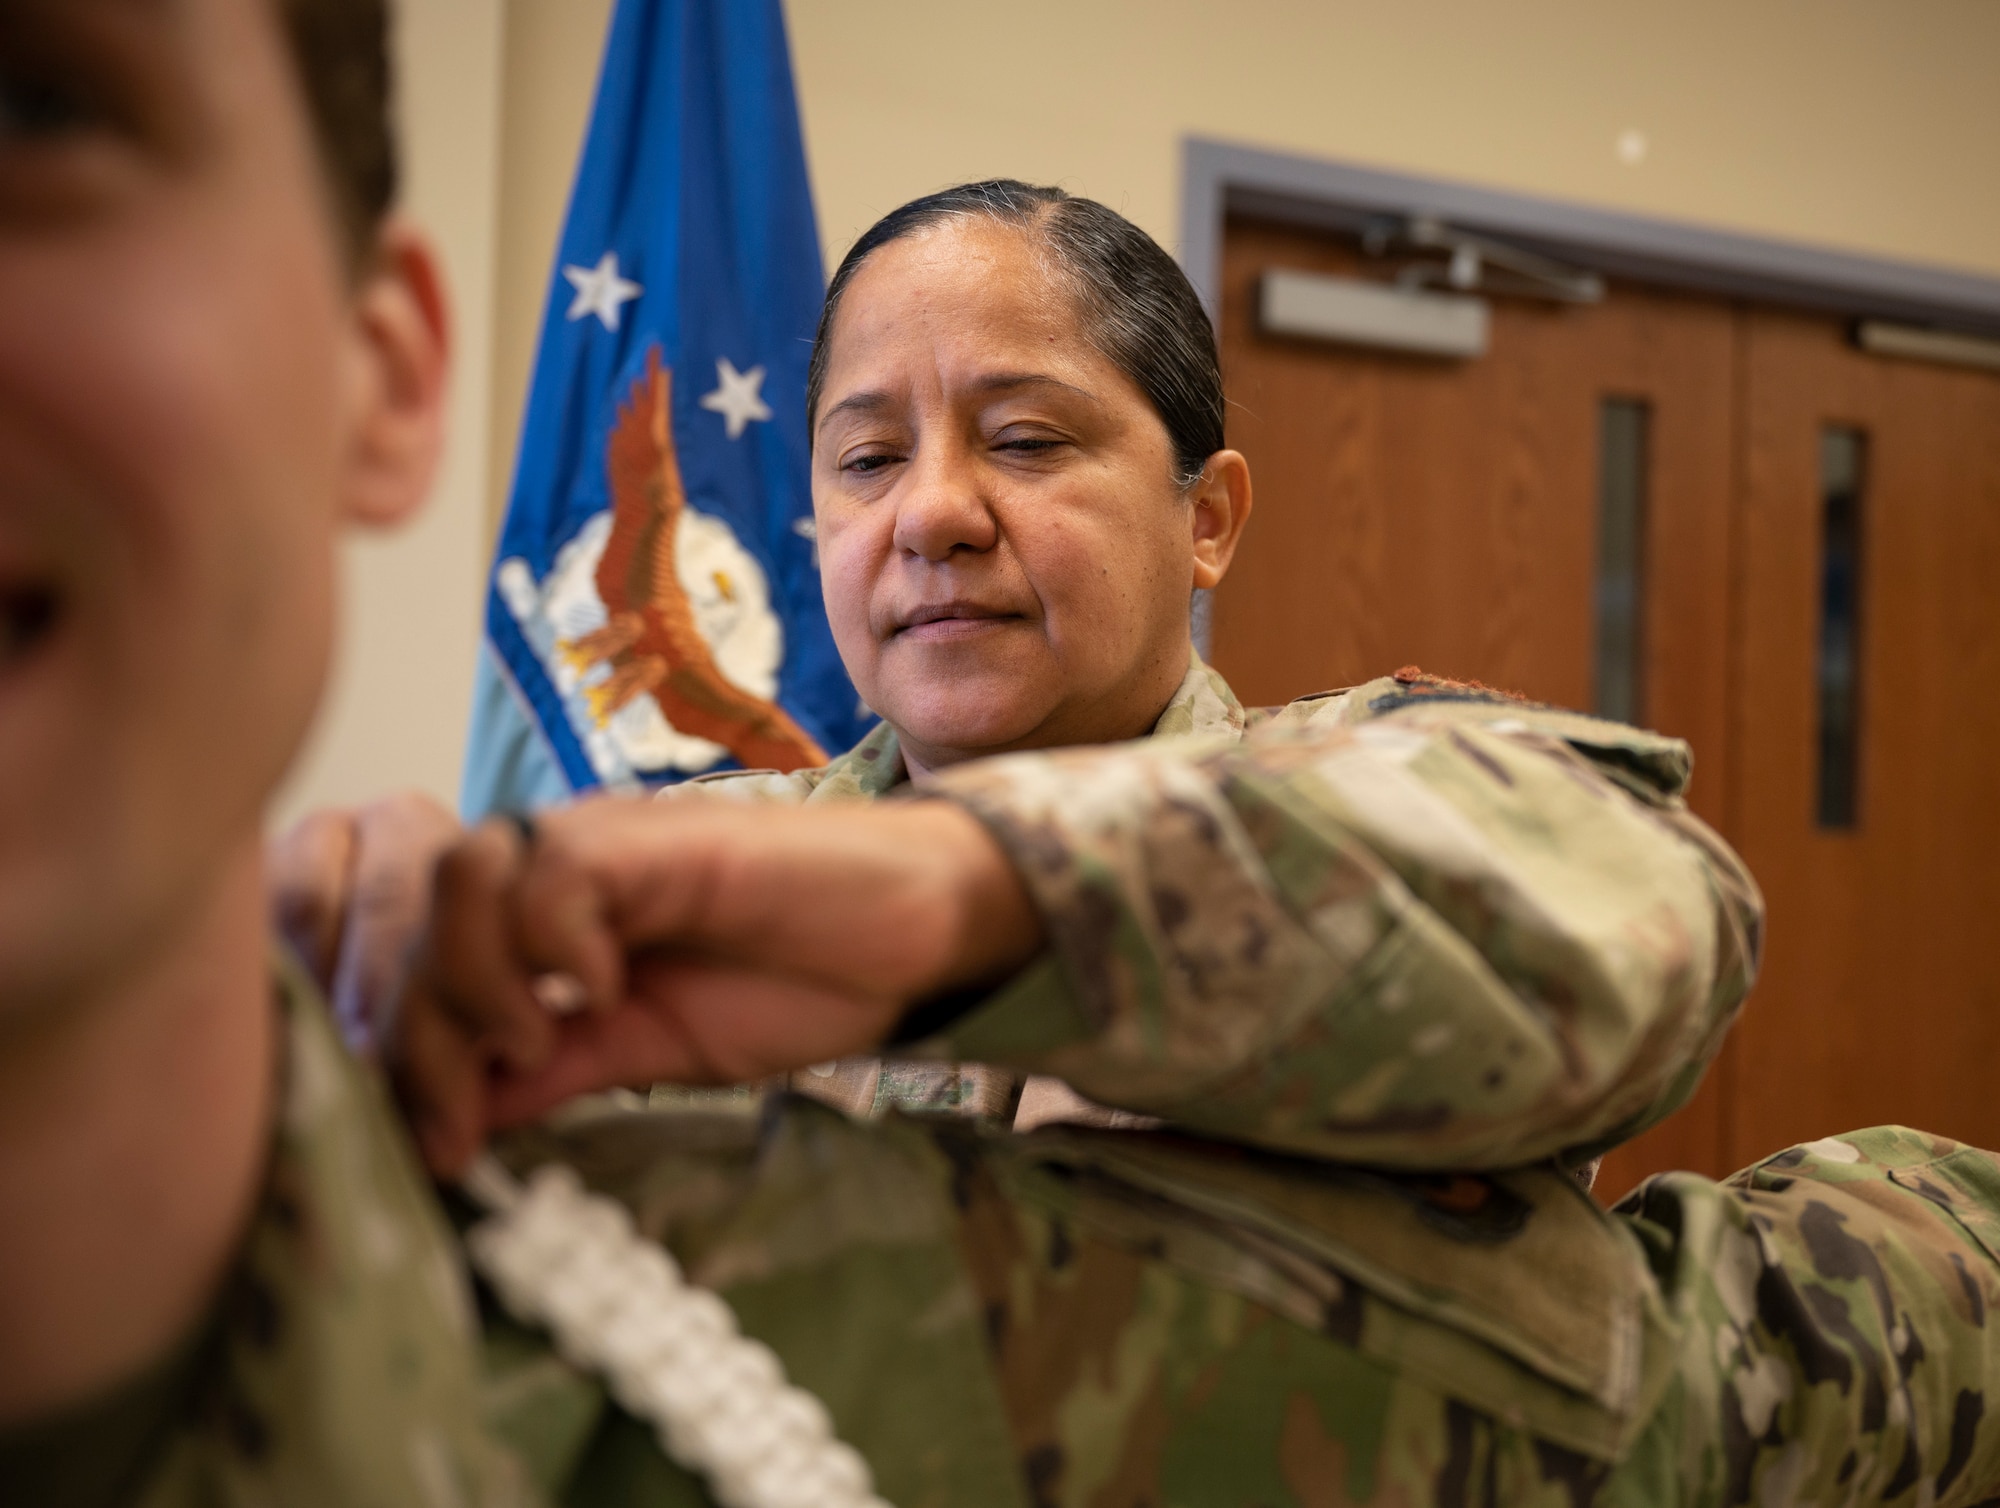 Tech. Sgt. Nancy Niles, 436th Airlift Wing Religious Affairs Airman, mounts an aiguillette at Chapel 1 on Dover Air Force Base, Delaware, Nov. 23, 2022. The 436th AW Chapel will introduce the White Rope program Dec. 2022, extending the chapel’s reach across the base through liaisons trained in crisis intervention. (U.S. Air Force photo by Airman 1st Class Amanda Jett)